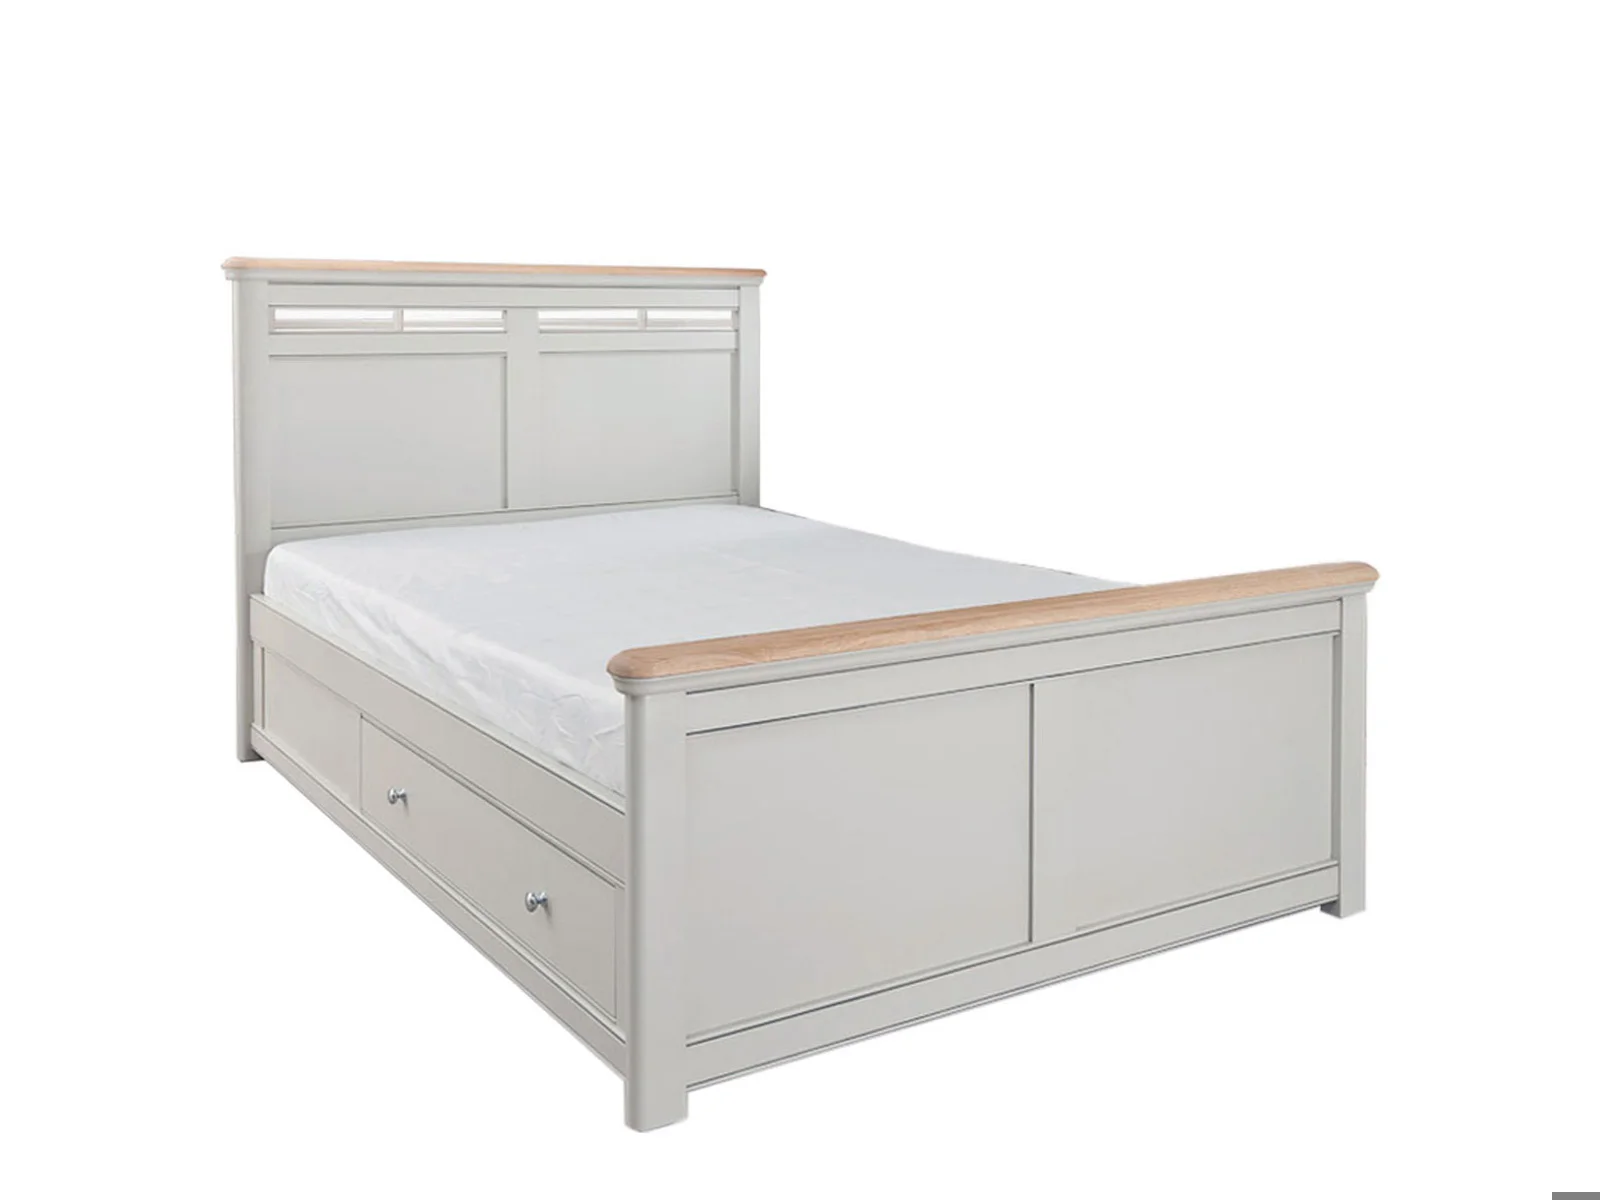 Super King Size Bed Frame (With Storage)